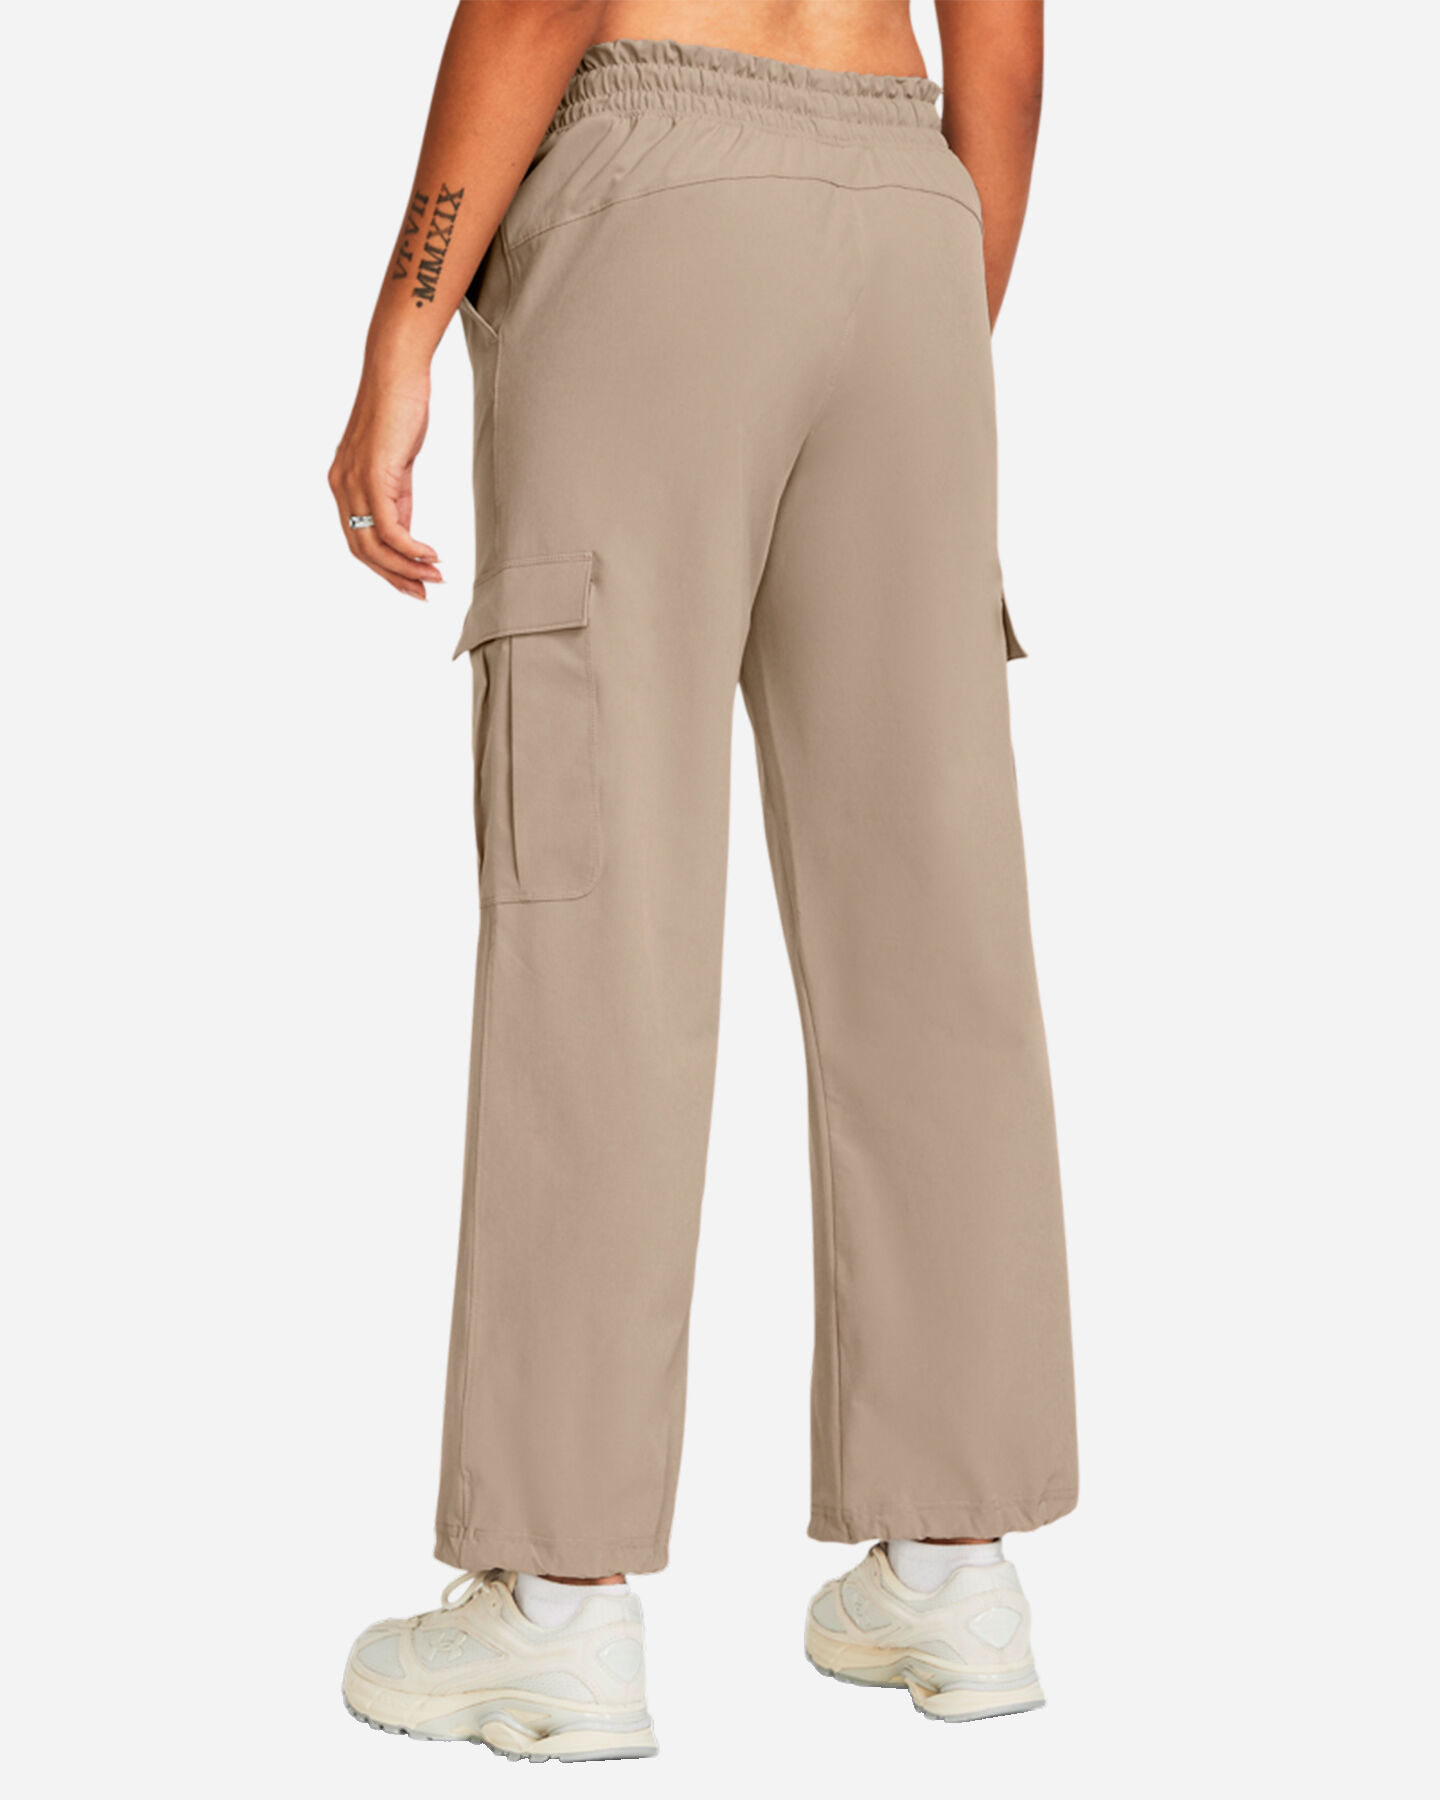  Pantalone UNDER ARMOUR WOVEN CARGO W S5641524|0203|XS scatto 3